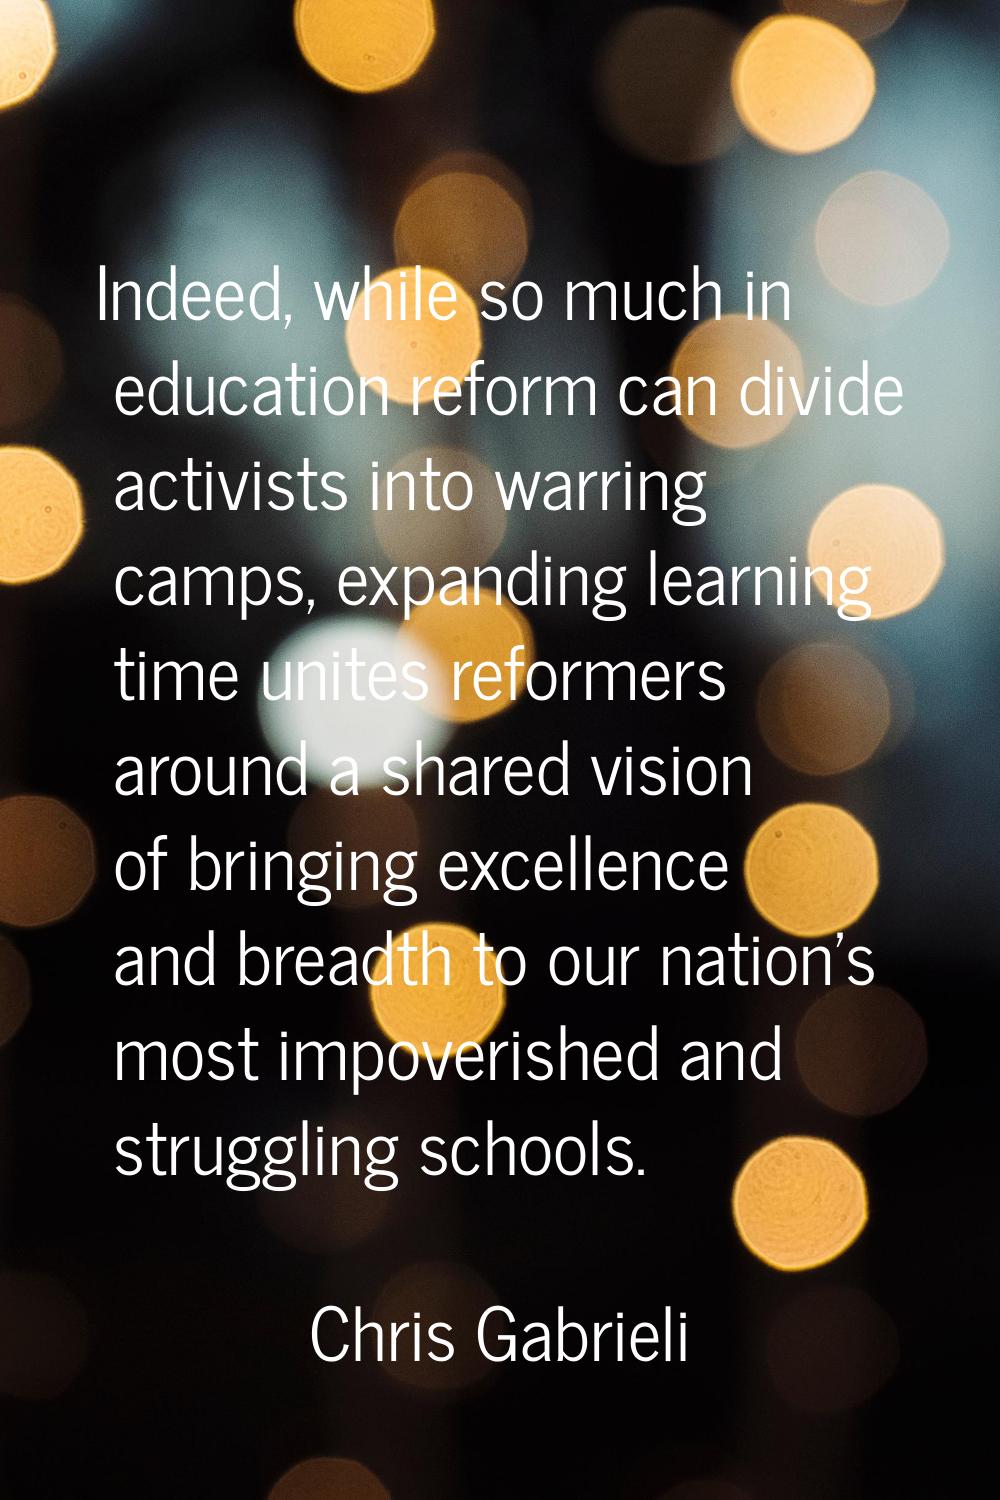 Indeed, while so much in education reform can divide activists into warring camps, expanding learni